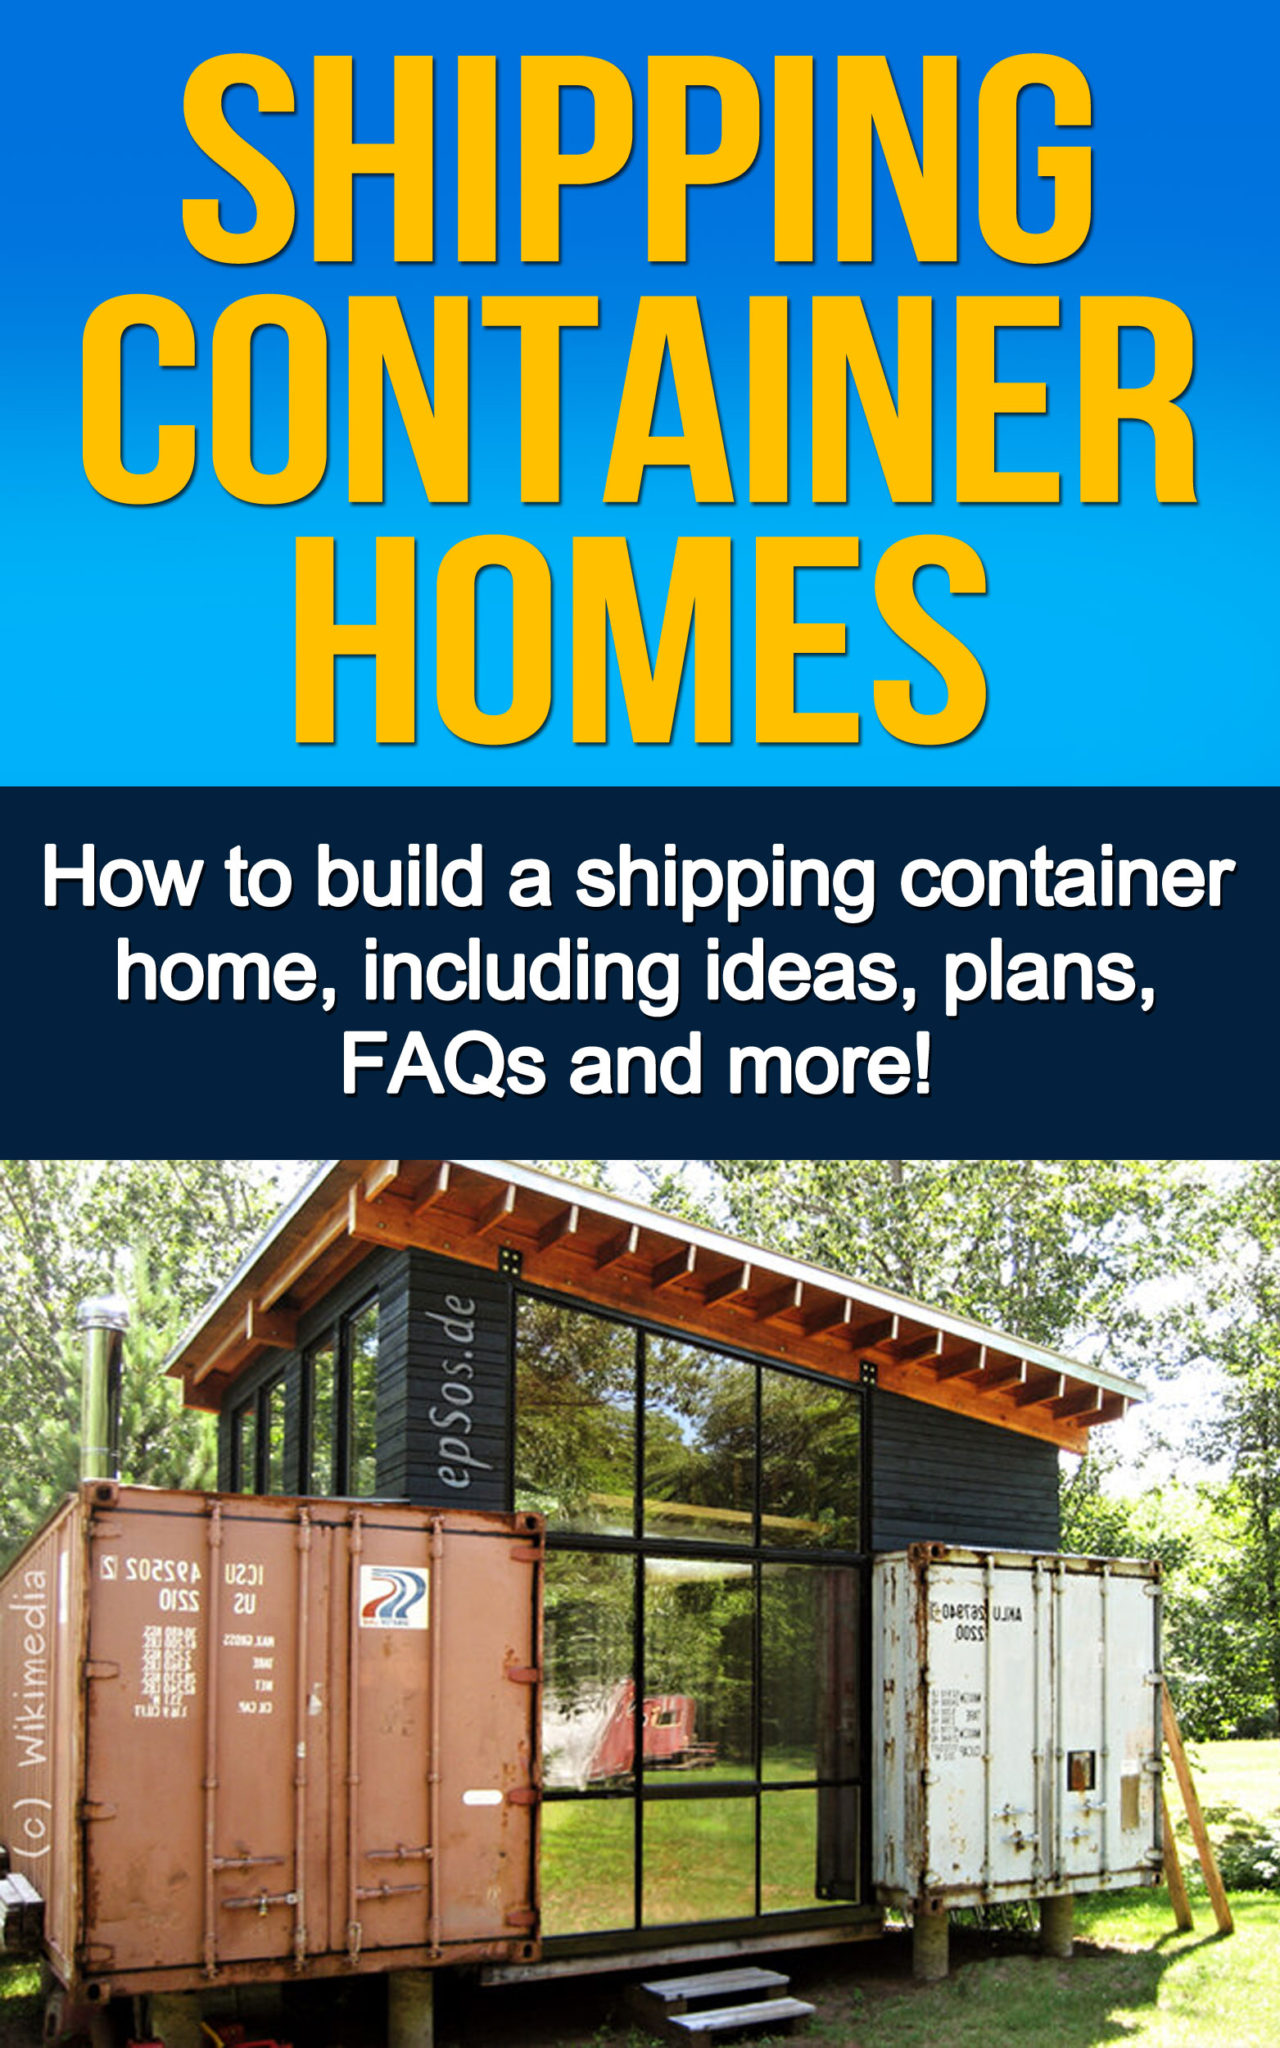 FREE: Shipping Container Homes: How to build a shipping container home, including ideas, plans, FAQs and more! by Daniel Knight